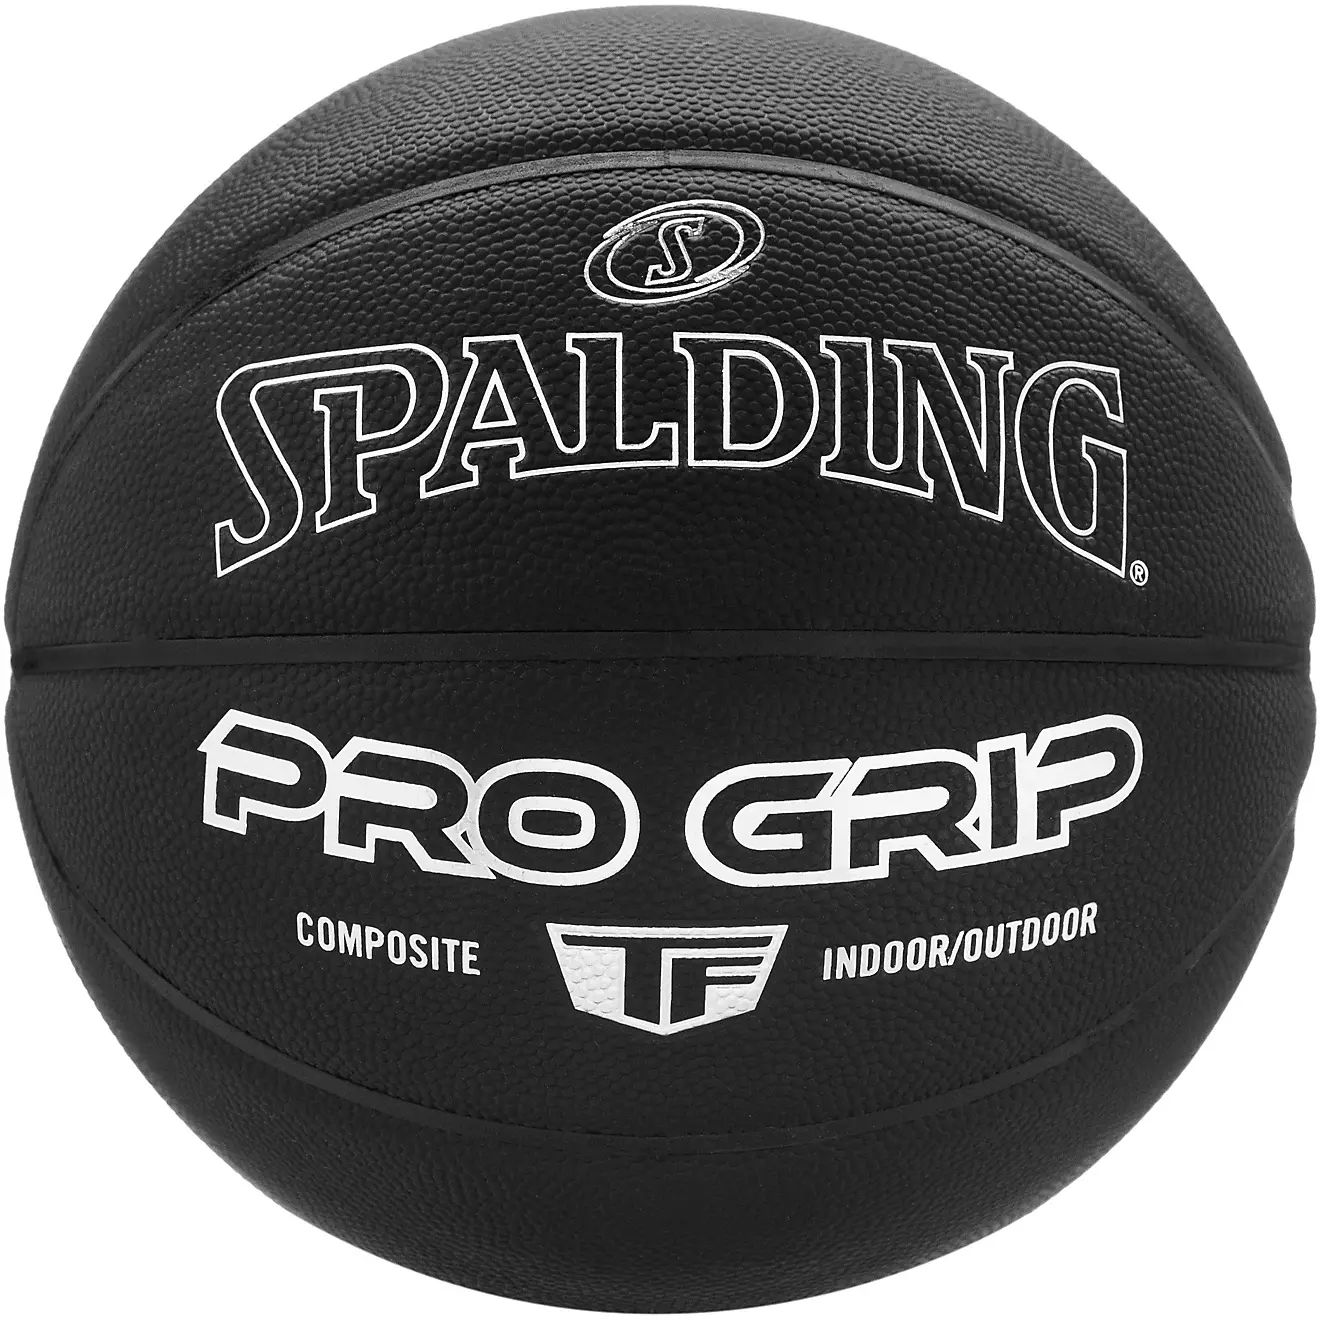 Spalding Pro Grip 29.5 in Basketball | Academy | Academy Sports + Outdoors